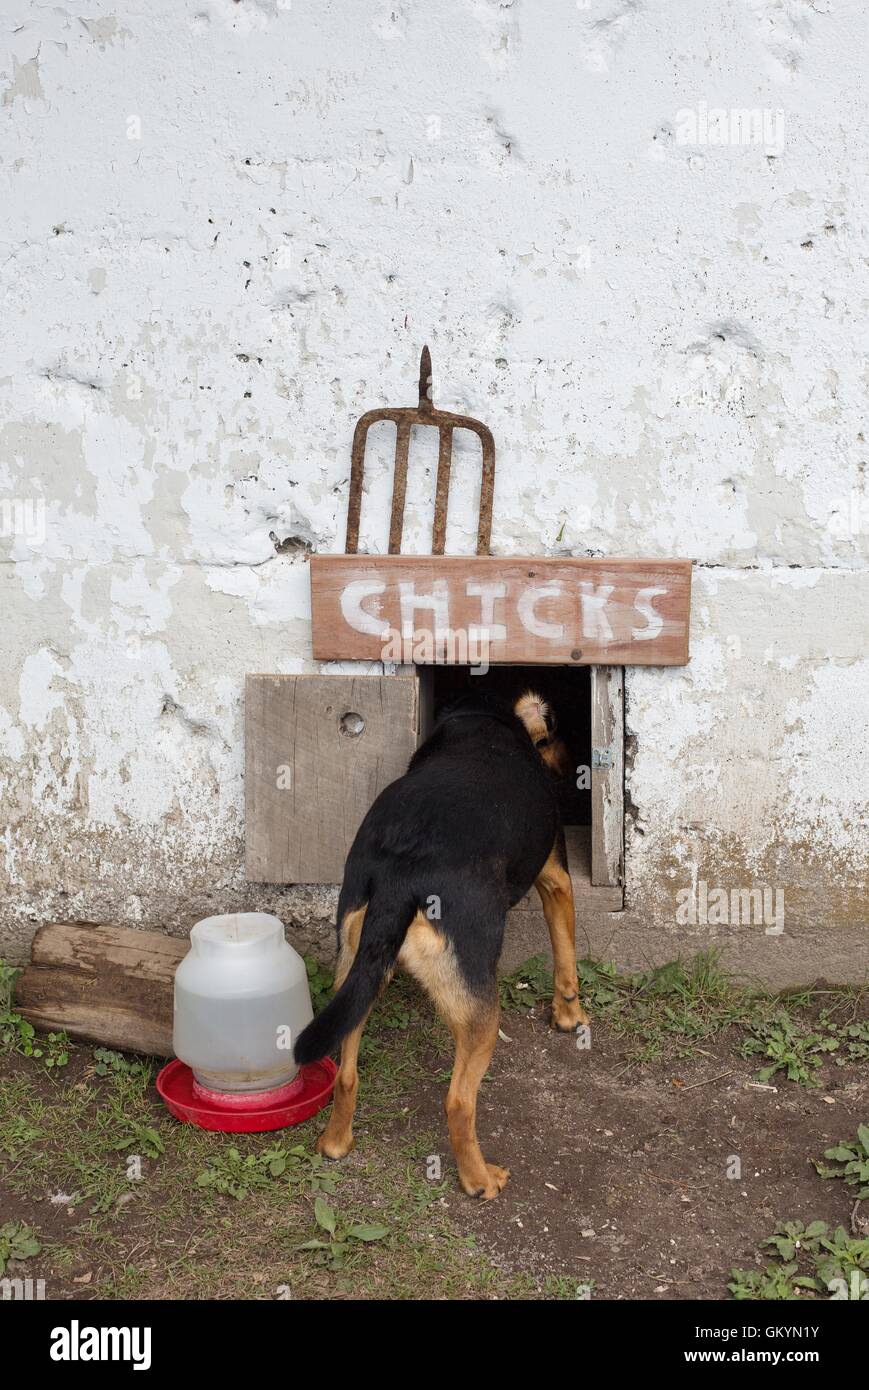 A dog poking his head into the doorway of a chicken coop. Stock Photo